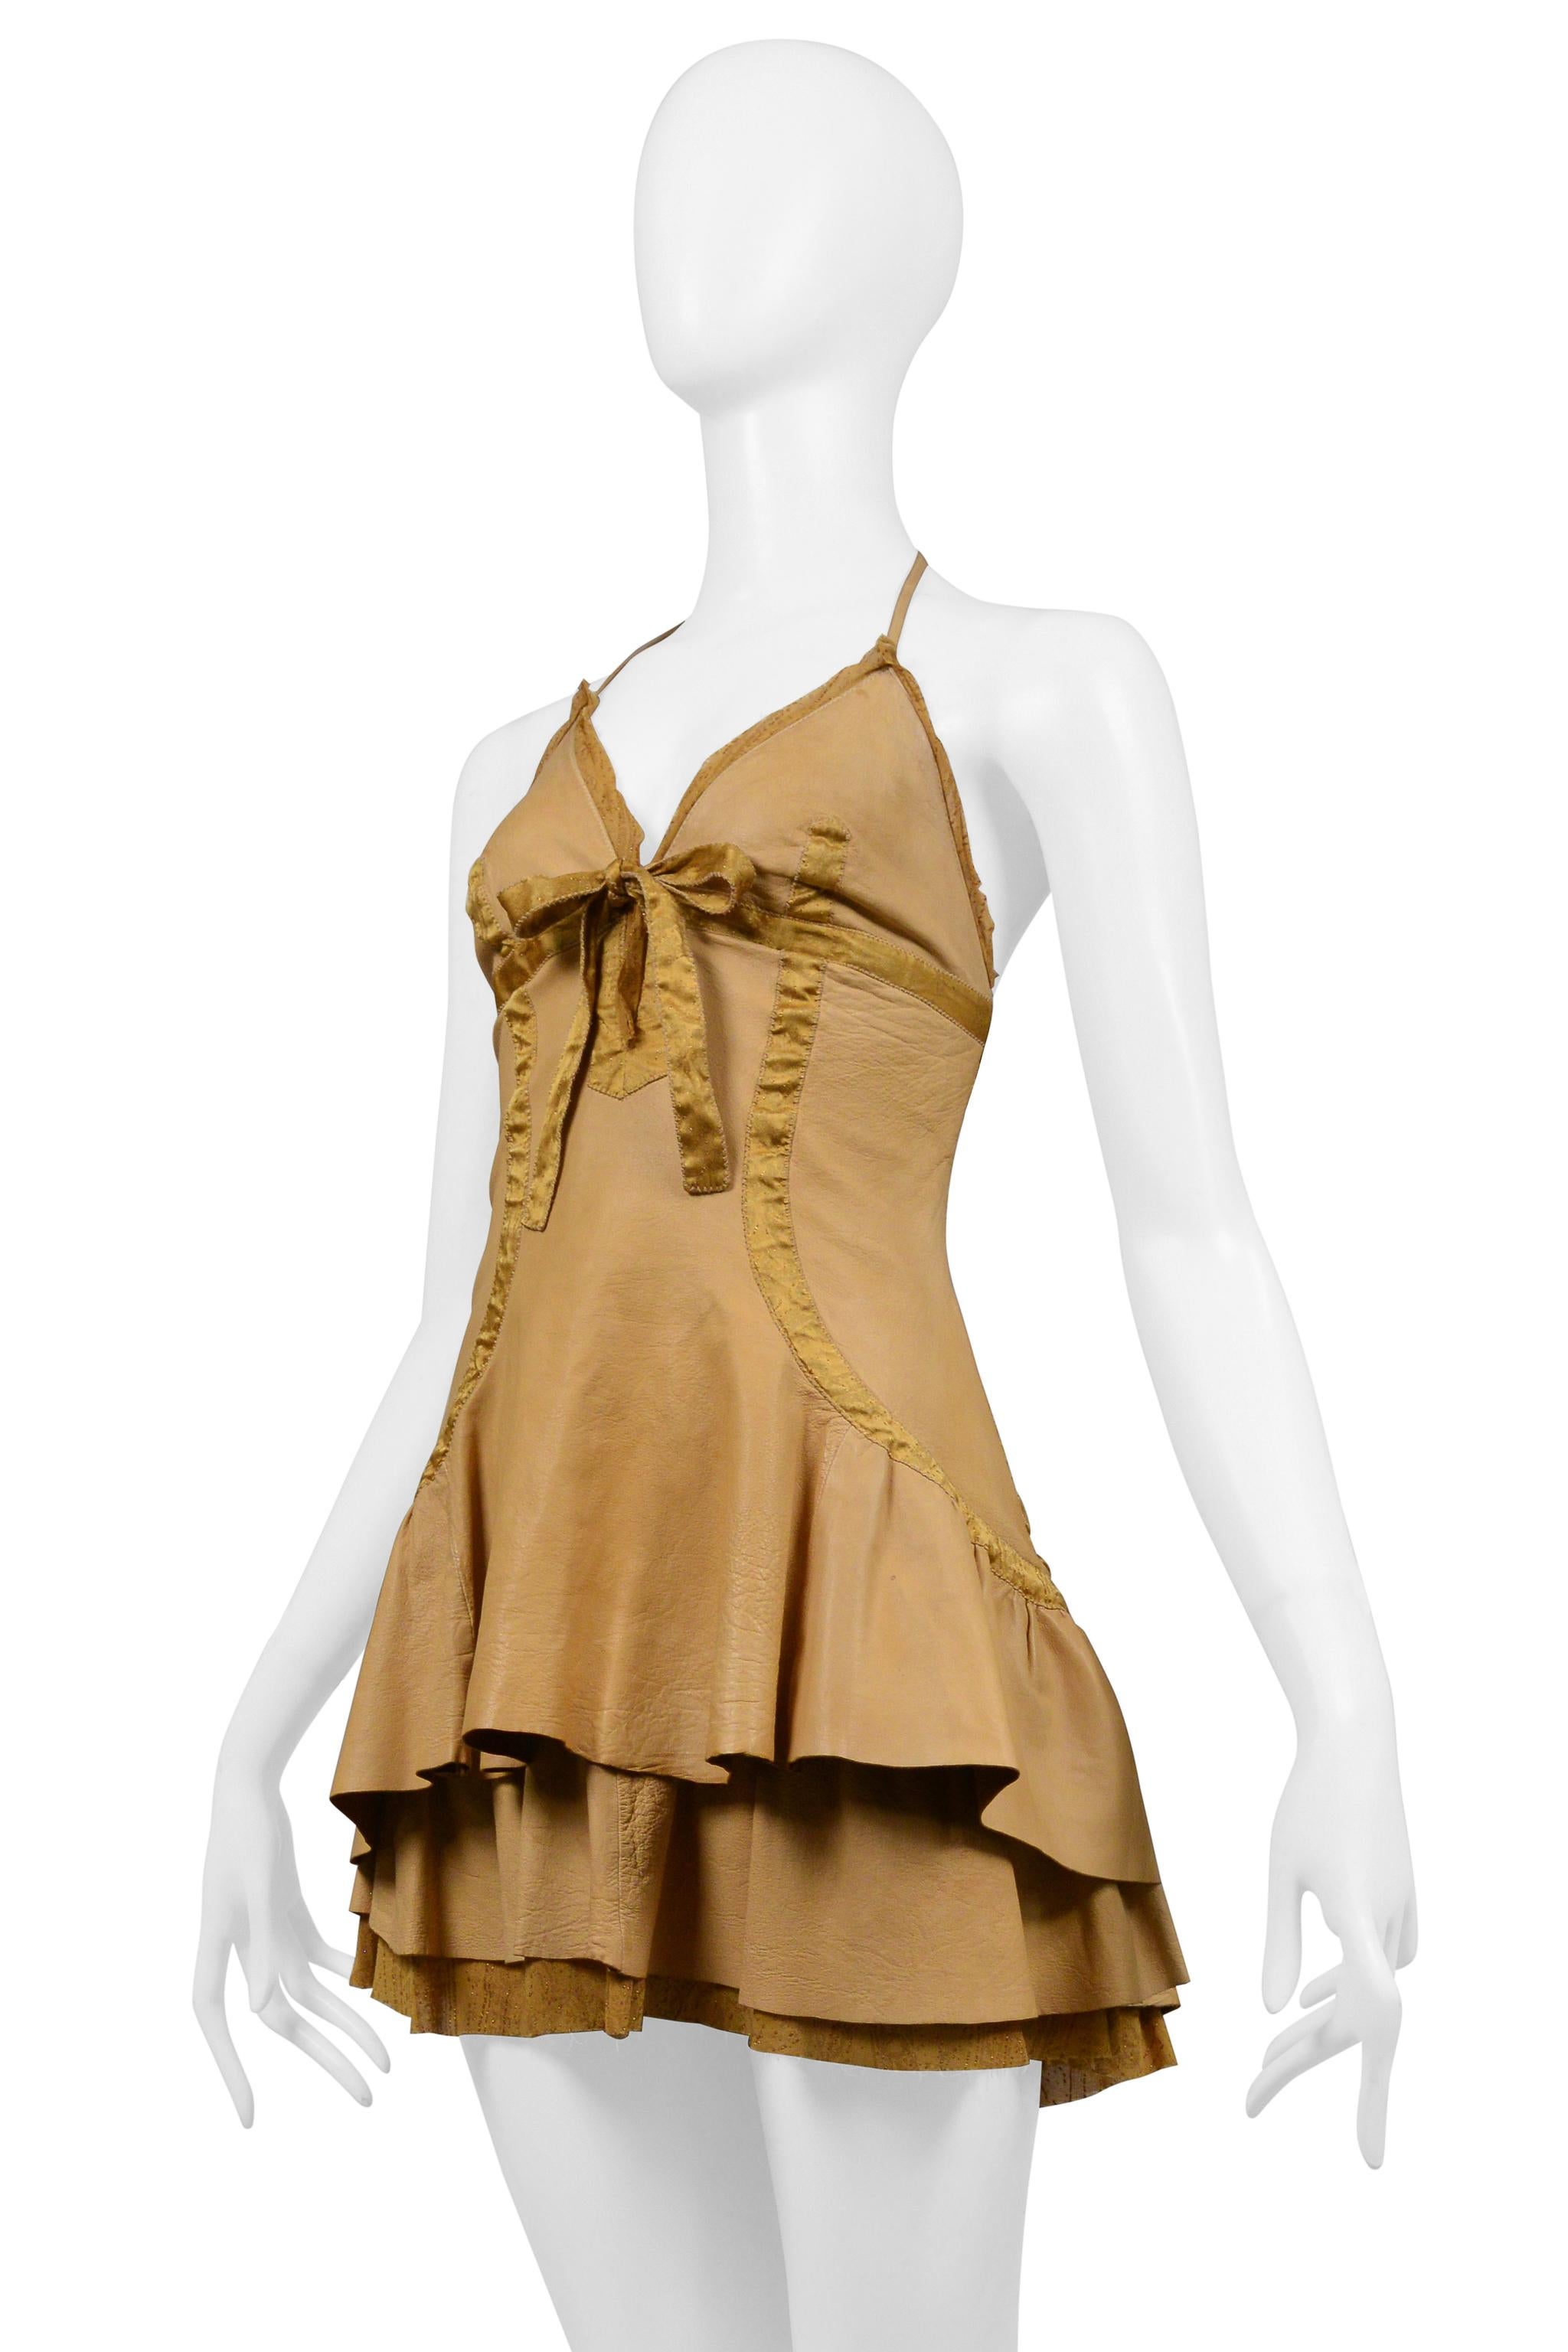 Roberto Cavalli Natural Leather Mini Dress In Good Condition For Sale In Los Angeles, CA